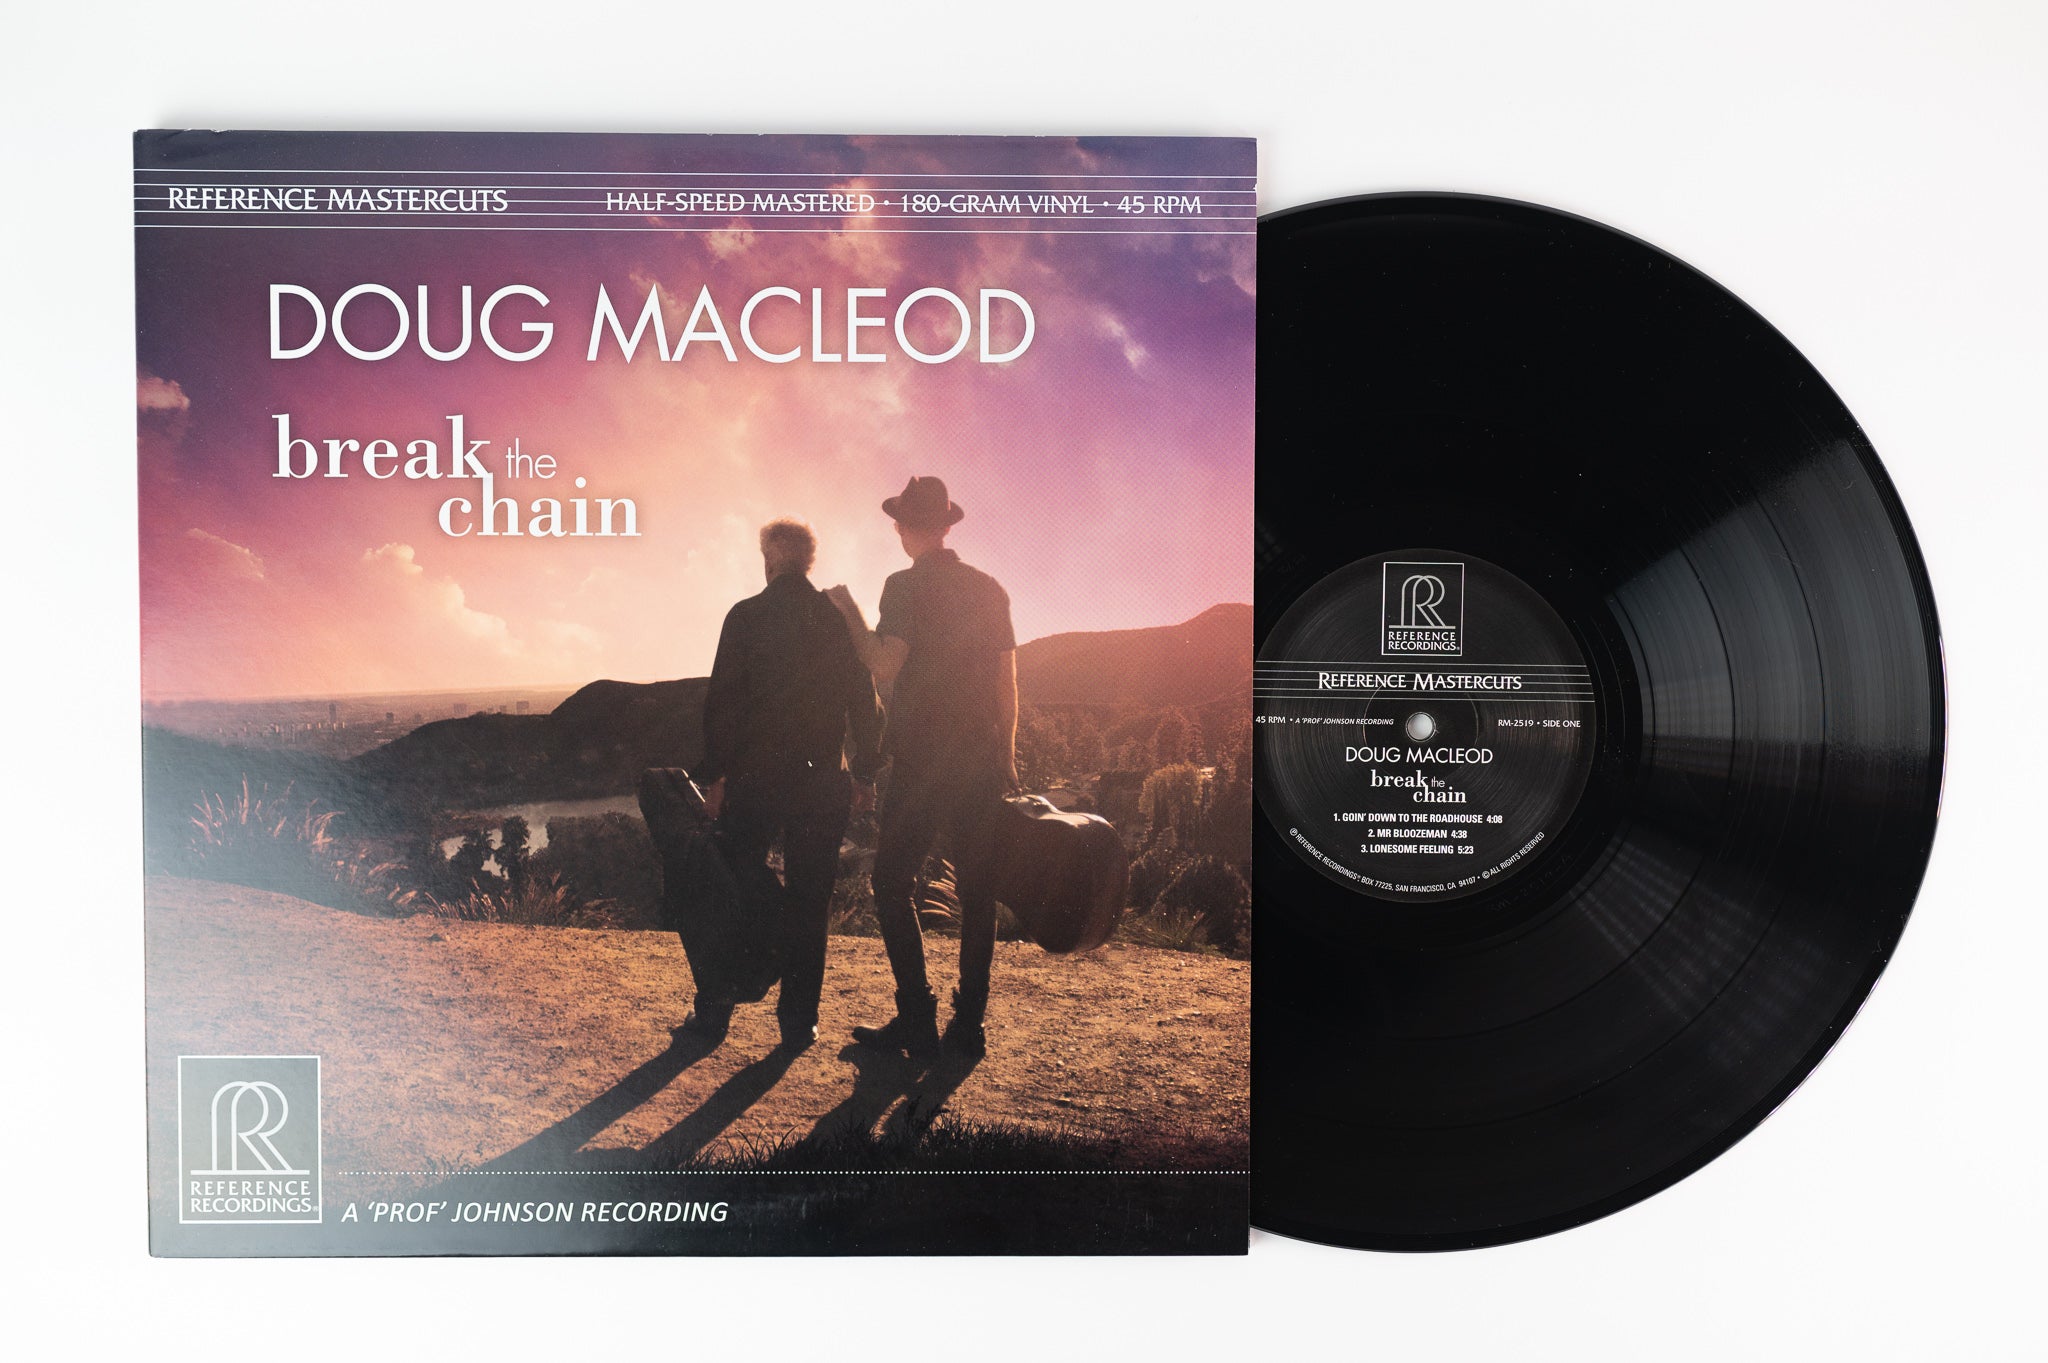 Doug MacLeod - Break The Chain on Reference Recordings